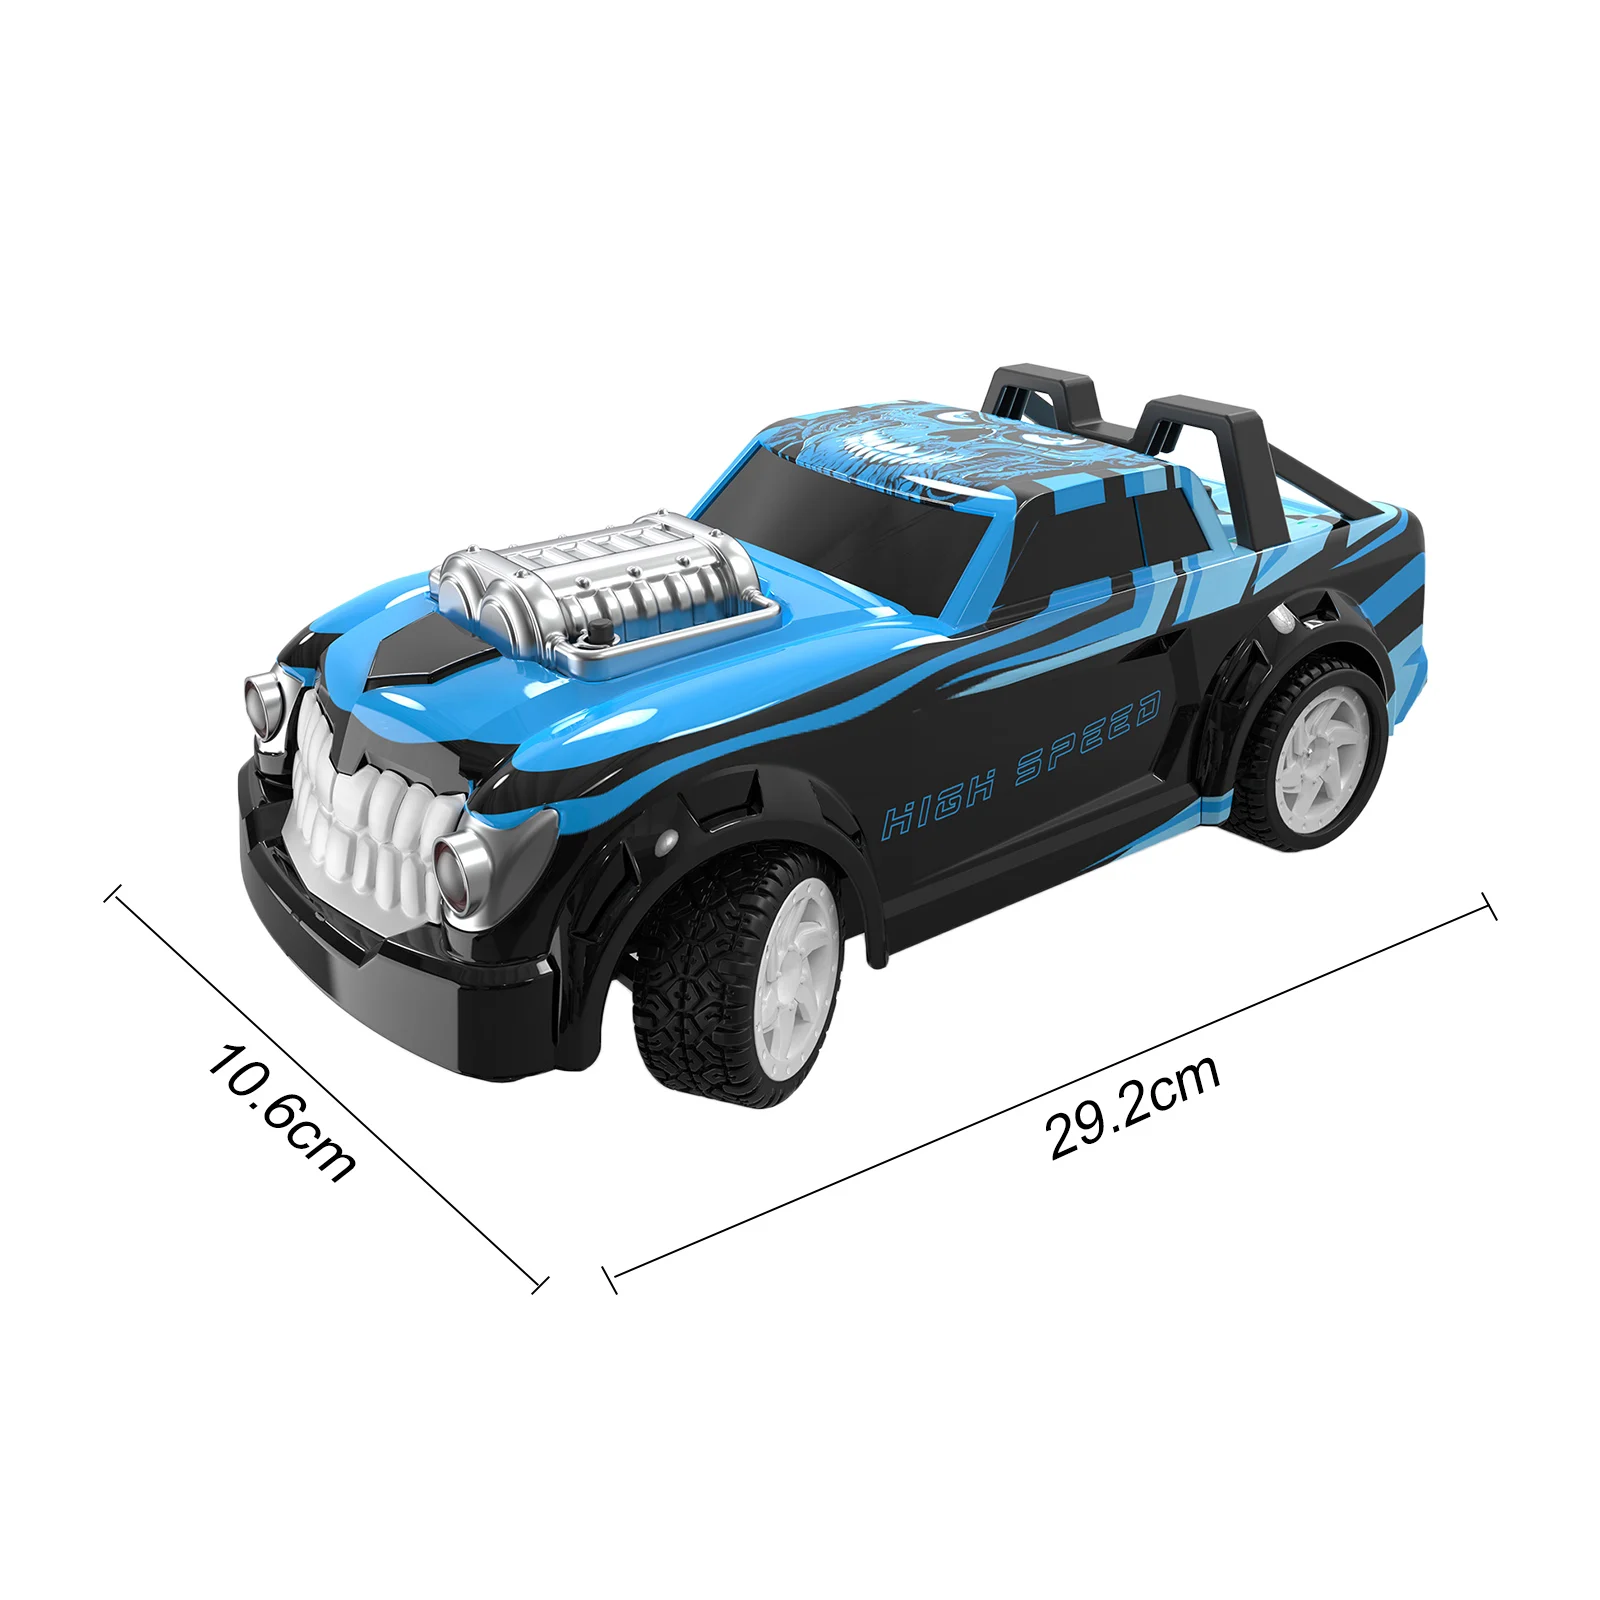 1:14 2.4G 4WD RC Car Racing Vehicle Model Toy Remote Control High Speed Cars Children Toys for Boys Kids Birthday Christmas Gift enlarge